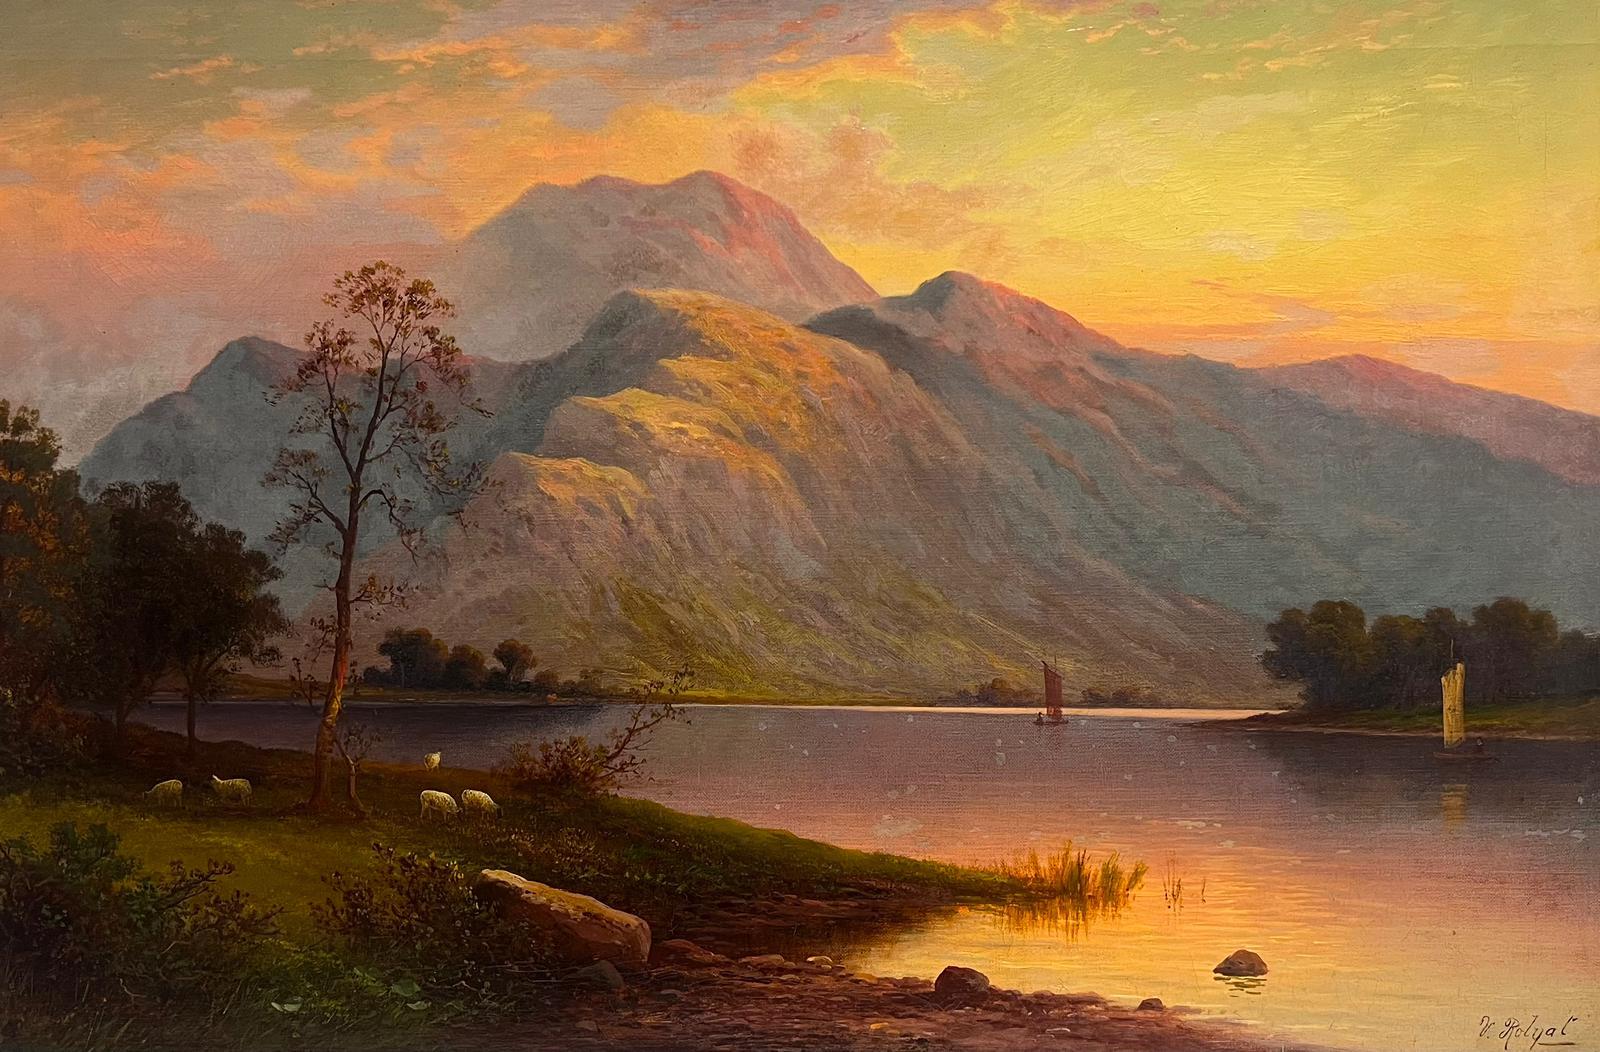 Sunset over Ullswater (English Lake District)
by Victor Rolyat (British late 19th century)
signed oil on canvas, framed
framed: 25 x 36 inches
canvas: 20 x 30 inches
provenance: private collection
condition: very good and sound condition